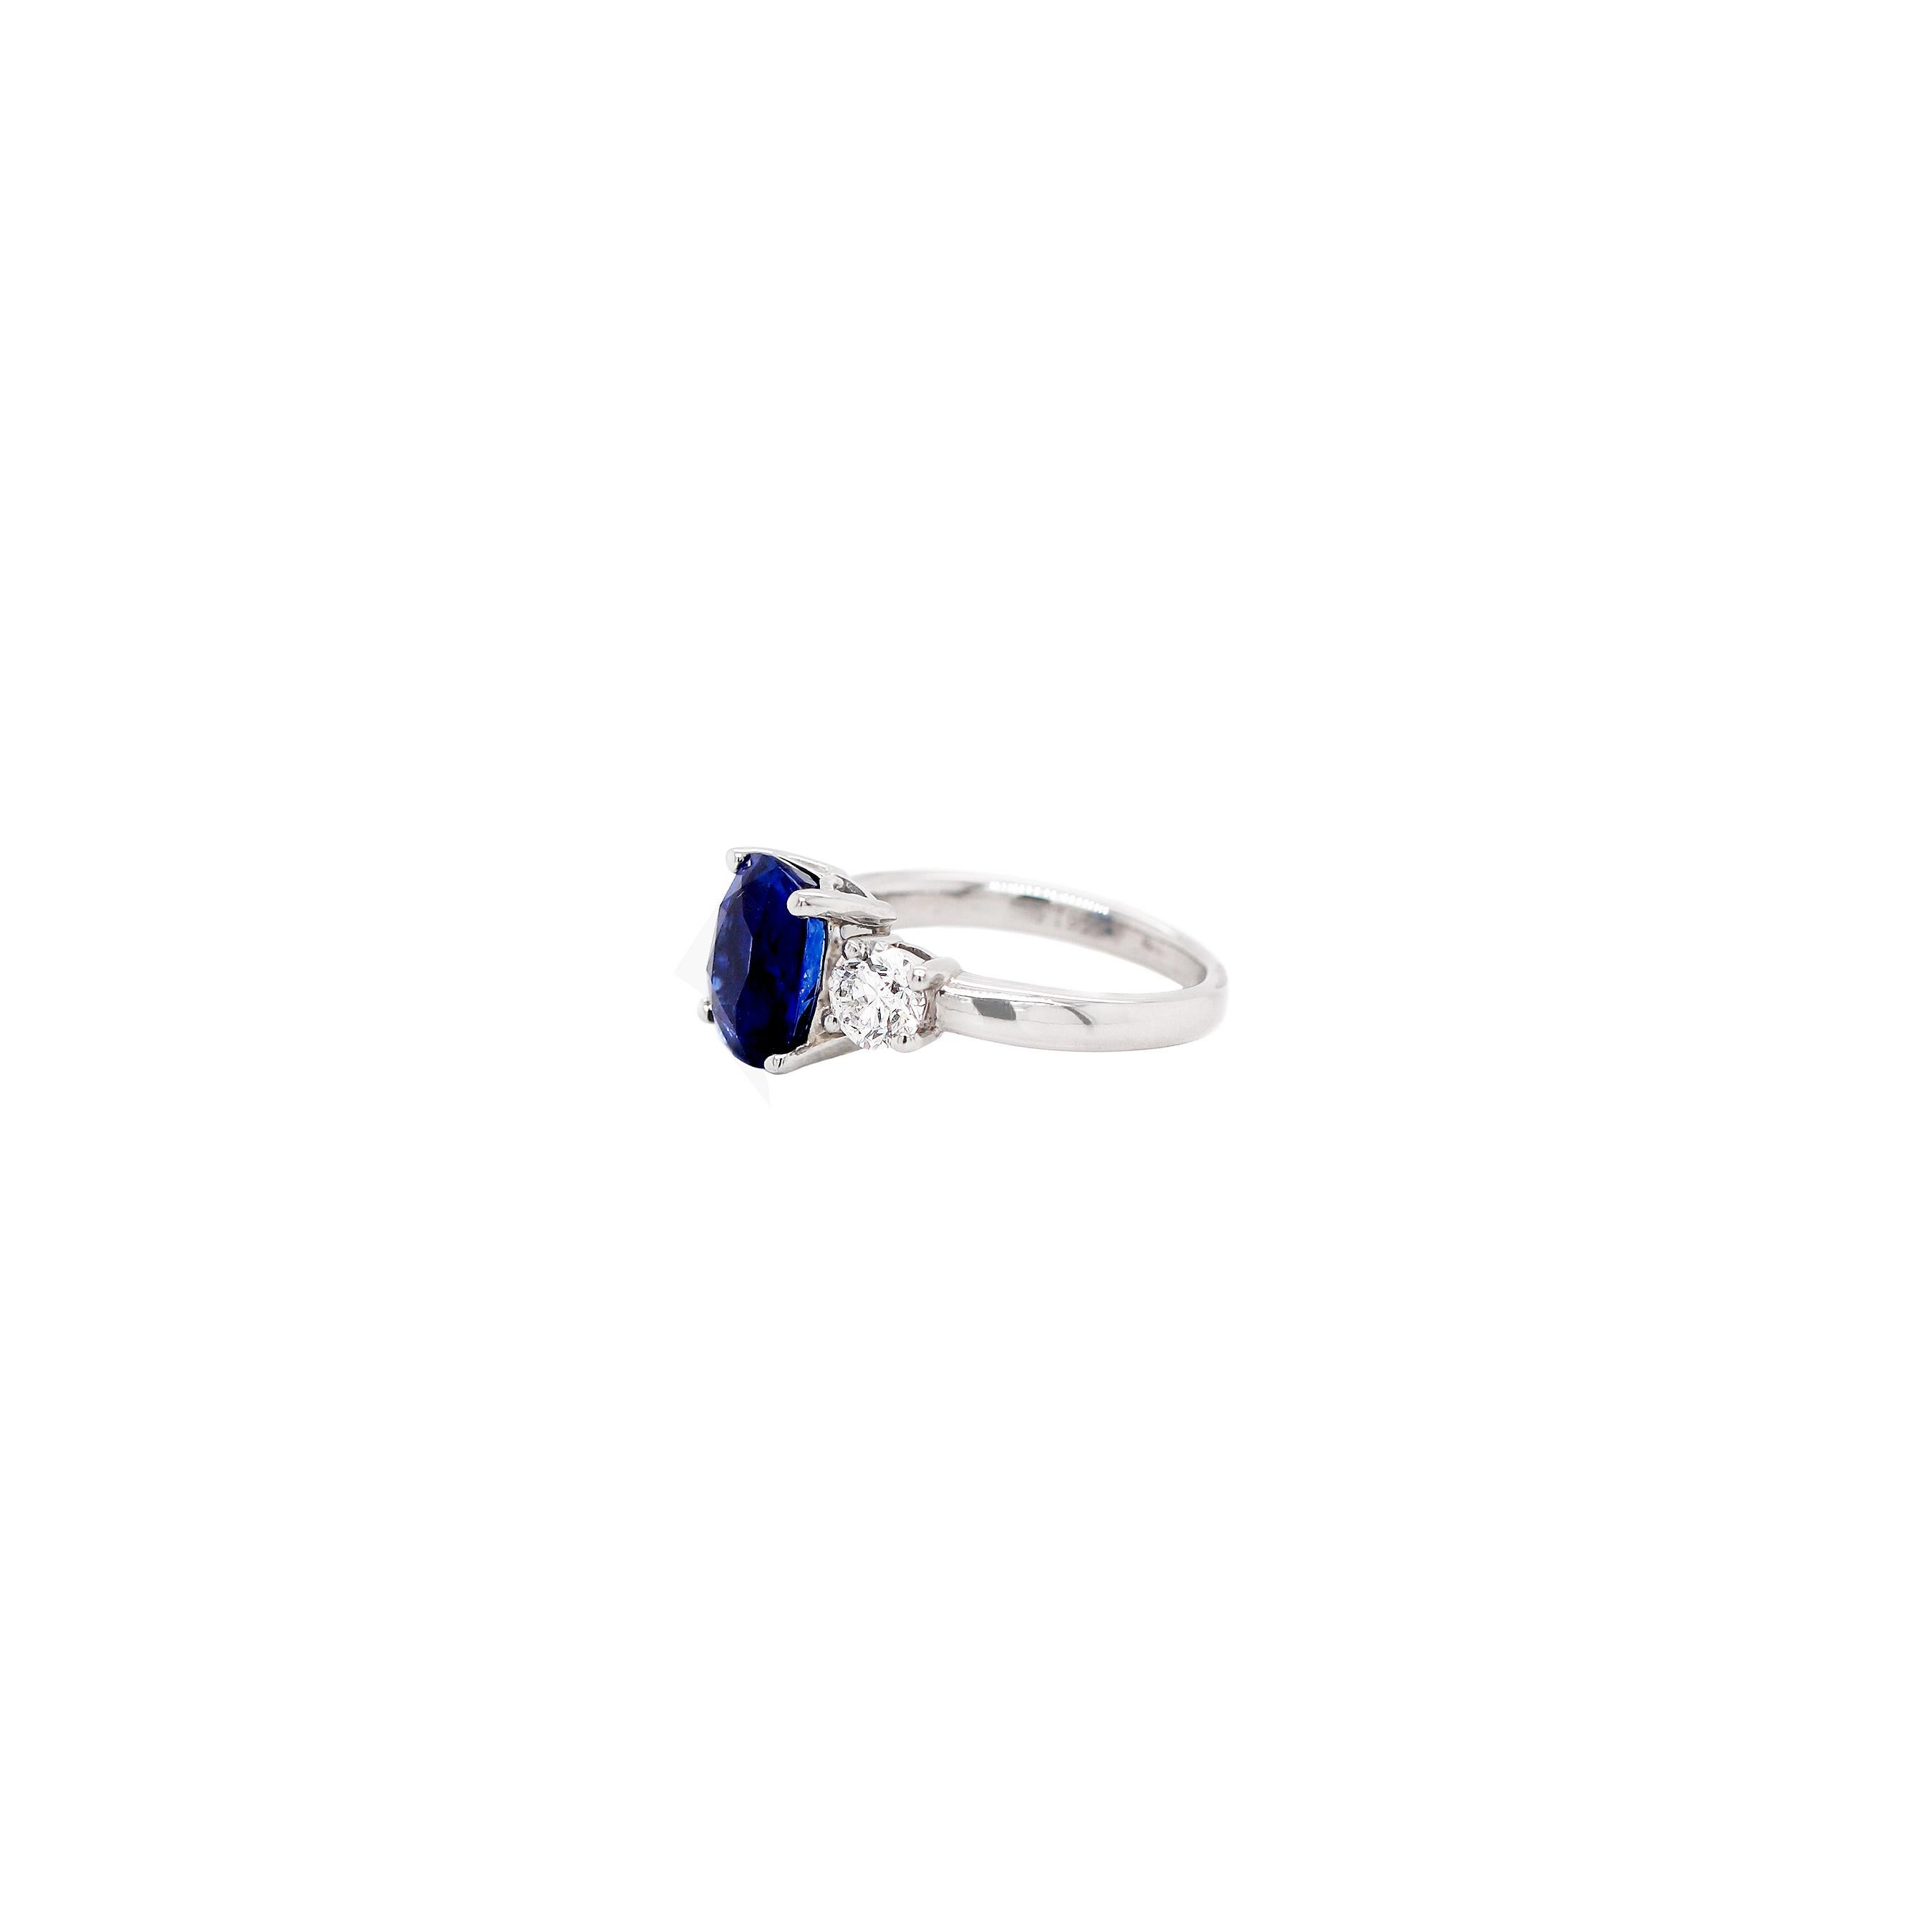 An exquisite three stone ring featuring a beautiful cushion shaped royal blue sapphire weighing 4.09ct in an open back, four claw setting. This gorgeous stone is accompanied by two certified D SI2 round brilliant cut diamonds on either side weighing